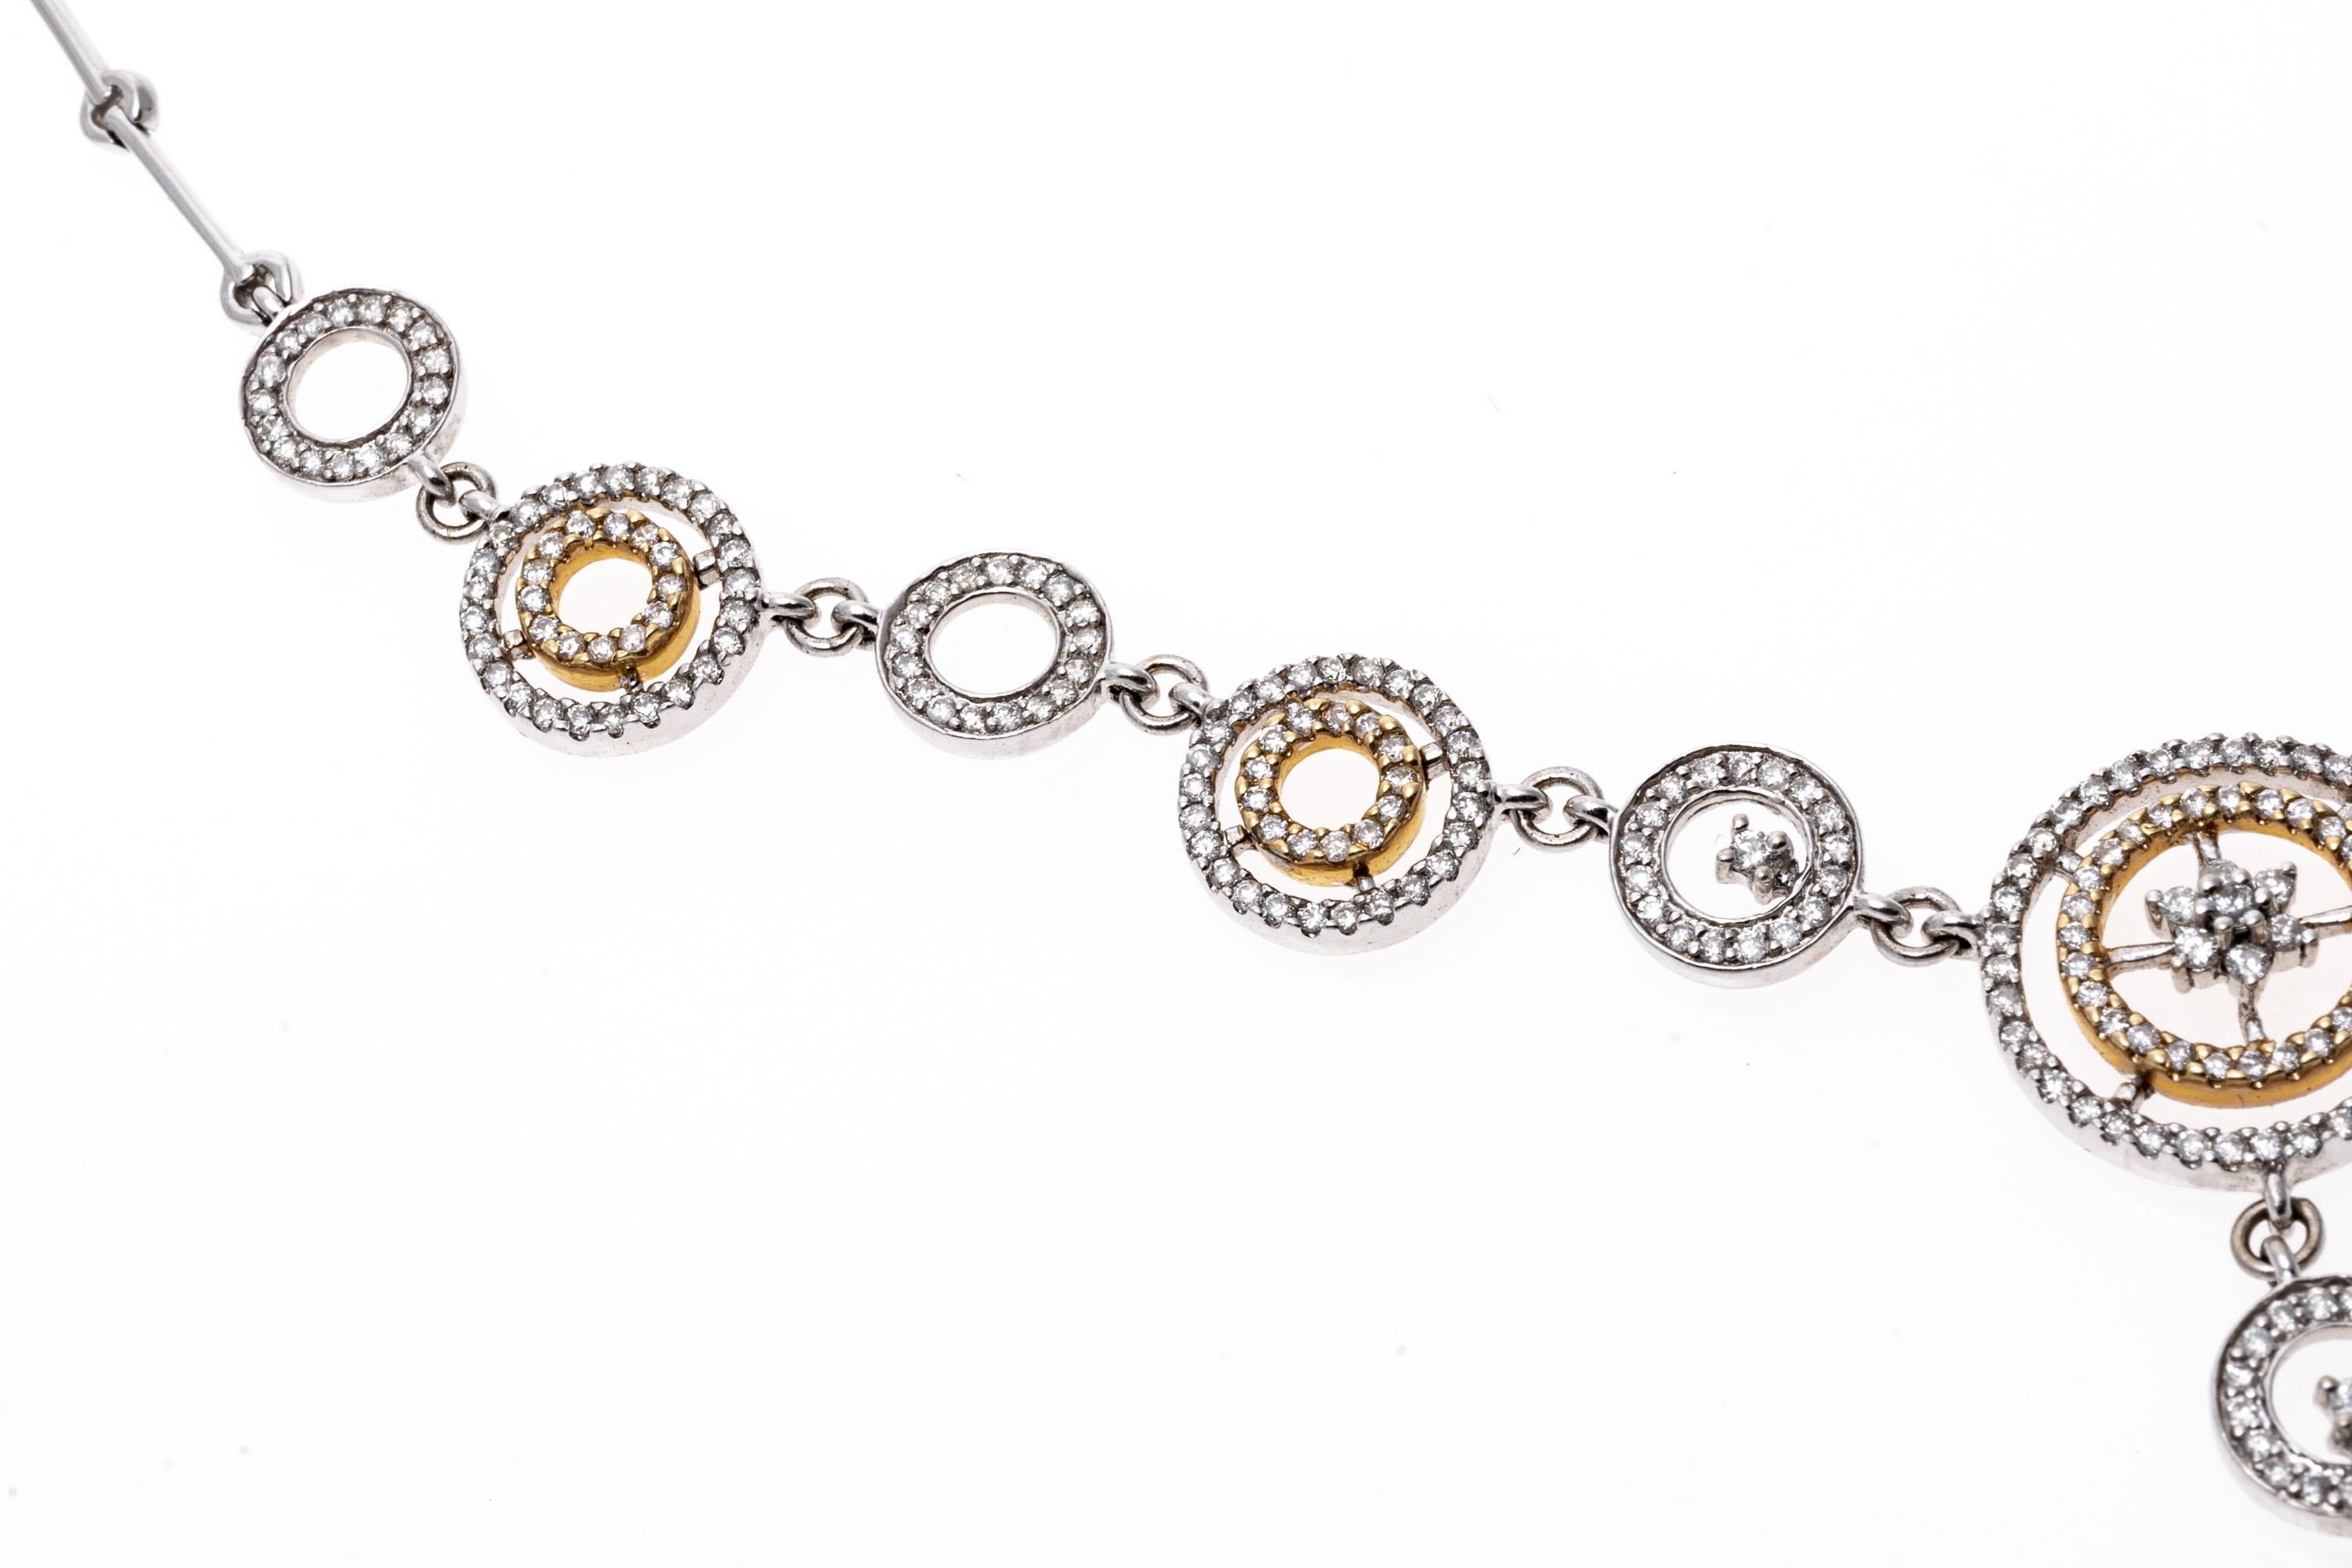 14K White Gold And Diamond Inset Circular Drop Necklace
This glamorous 14K white gold link necklace showcases rings of white and yellow gold. Set within and over the rings are round cut diamonds that create a dazzling shimmer. Suspended from the